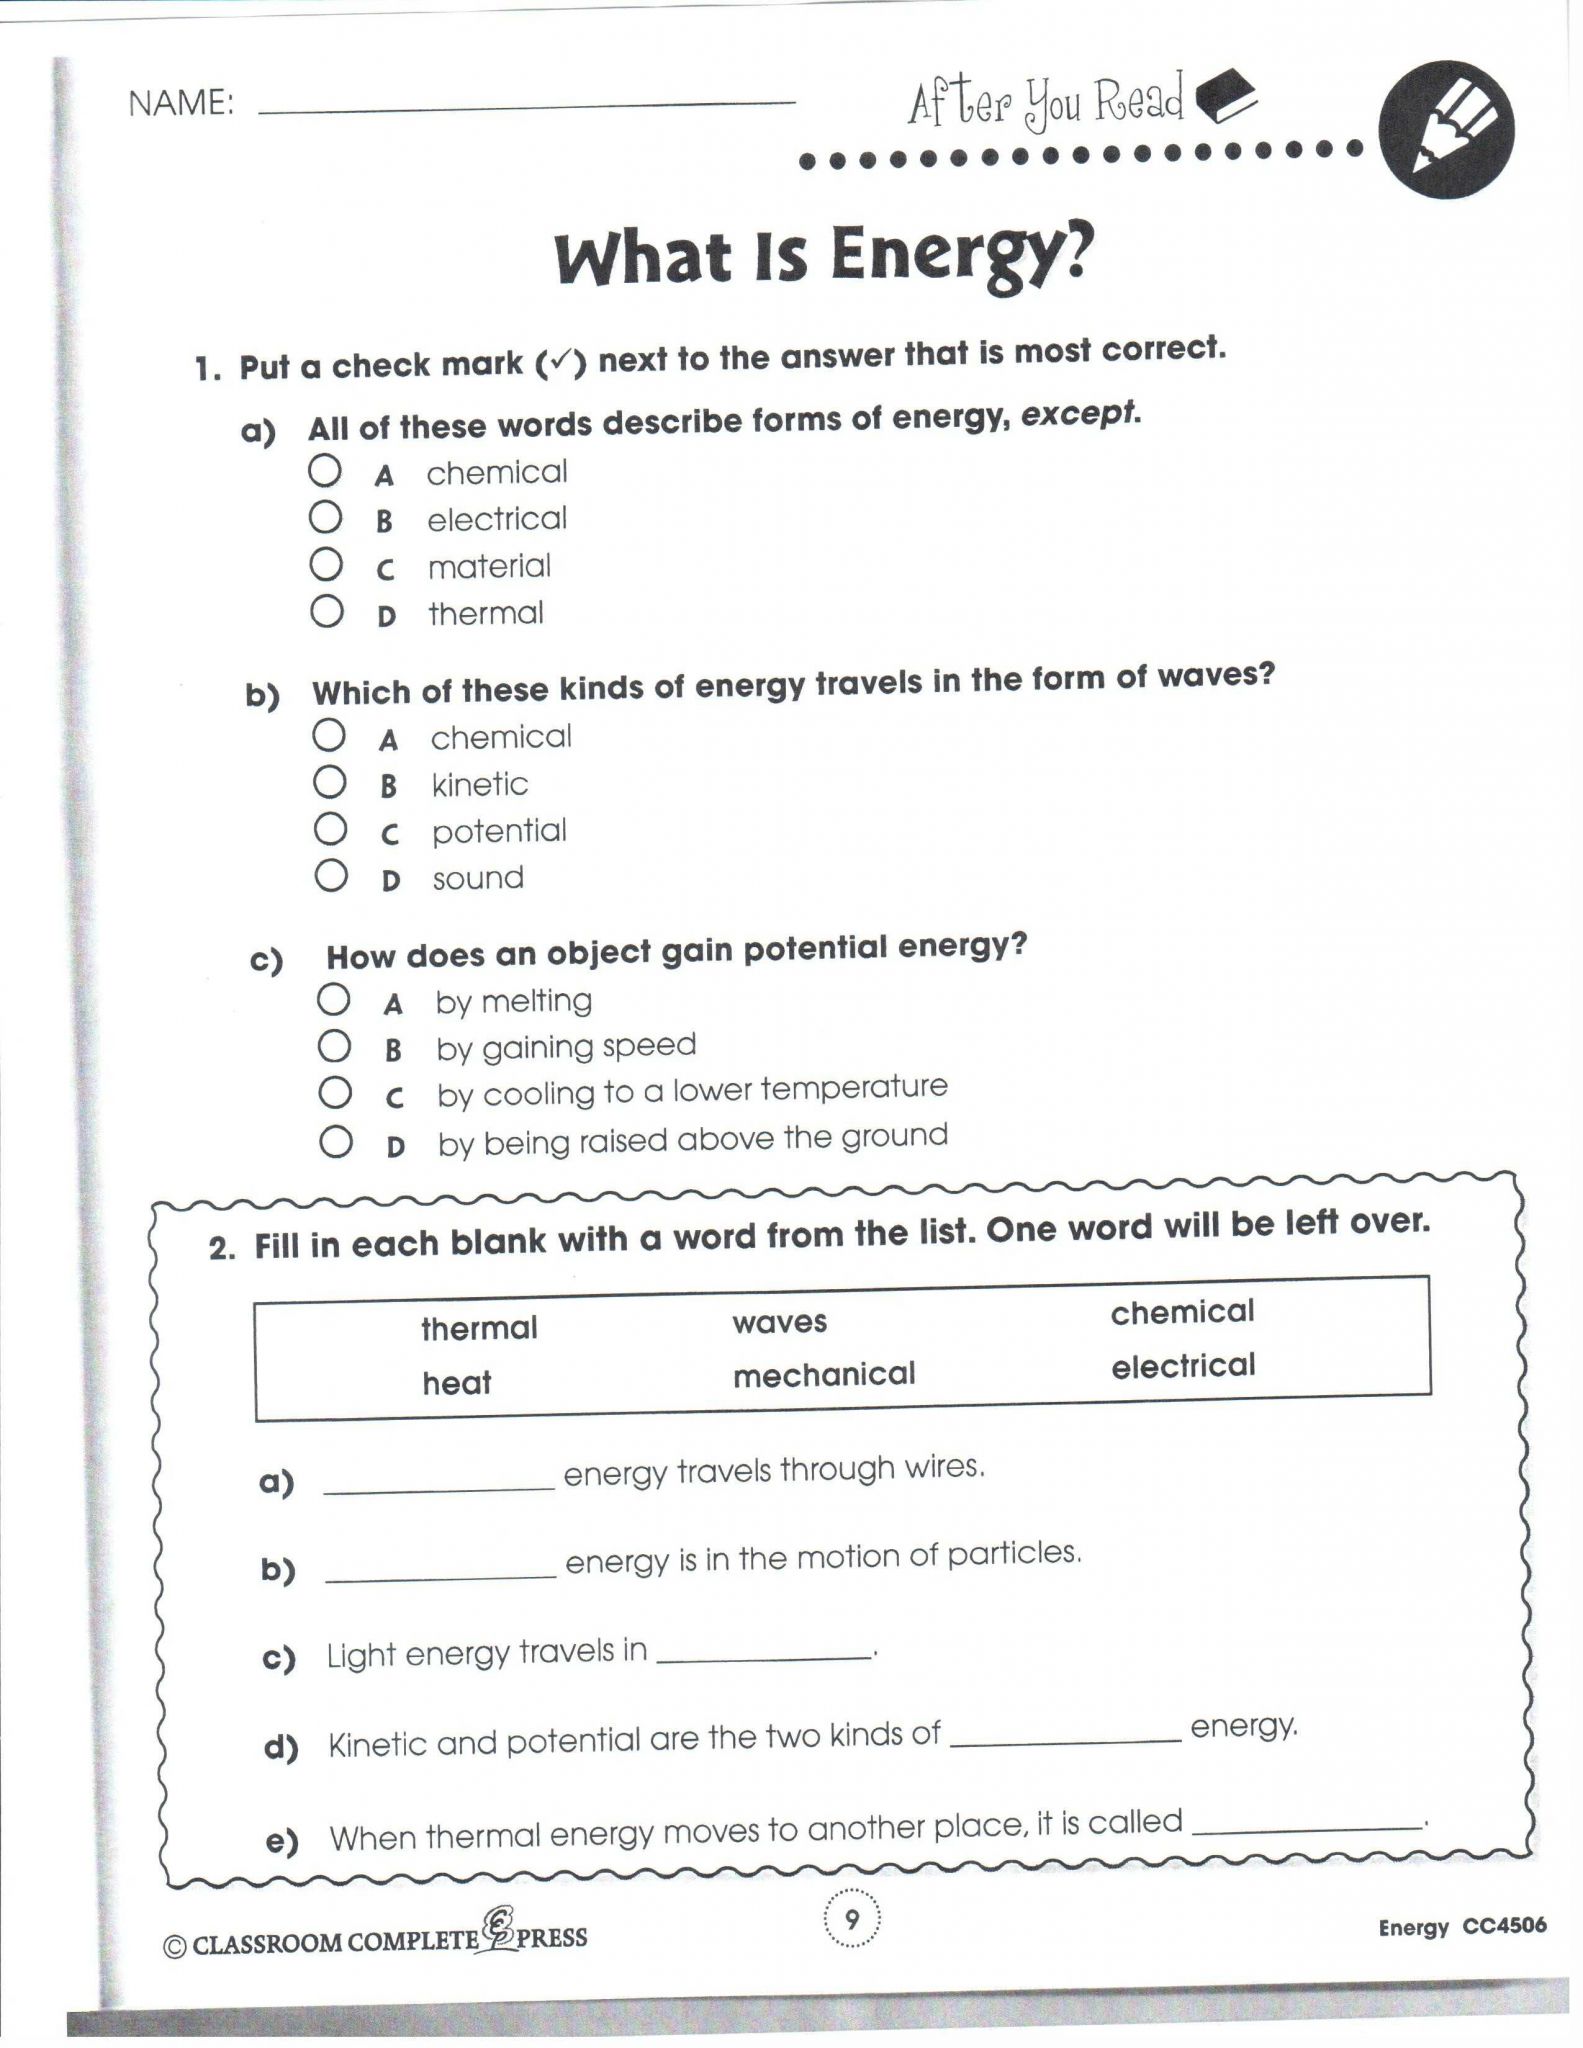 Bill Nye atmosphere Worksheet Answers and Bill Nye Waves Video Worksheet Answers Worksheet Math for Kids